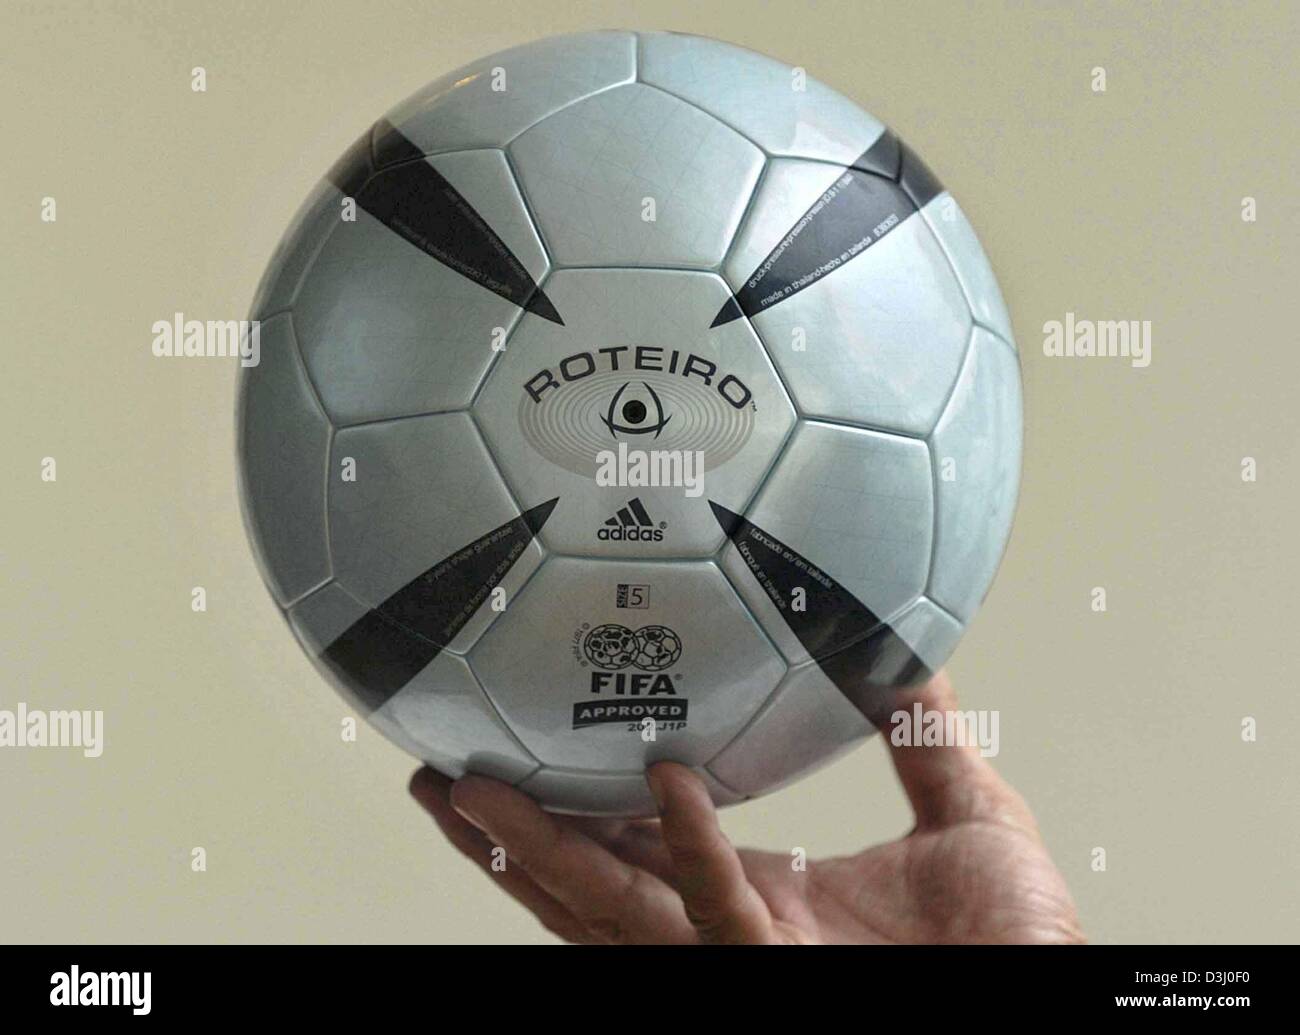 (dpa) - The official ball for the Euro 2004 soccer championships, called 'Roteiro', is presented in Almancil, near Faro, Portugal, 28 November 2003. The Euro 2004 championships will be held from 12 June to 4 July in Portugal. Stock Photo